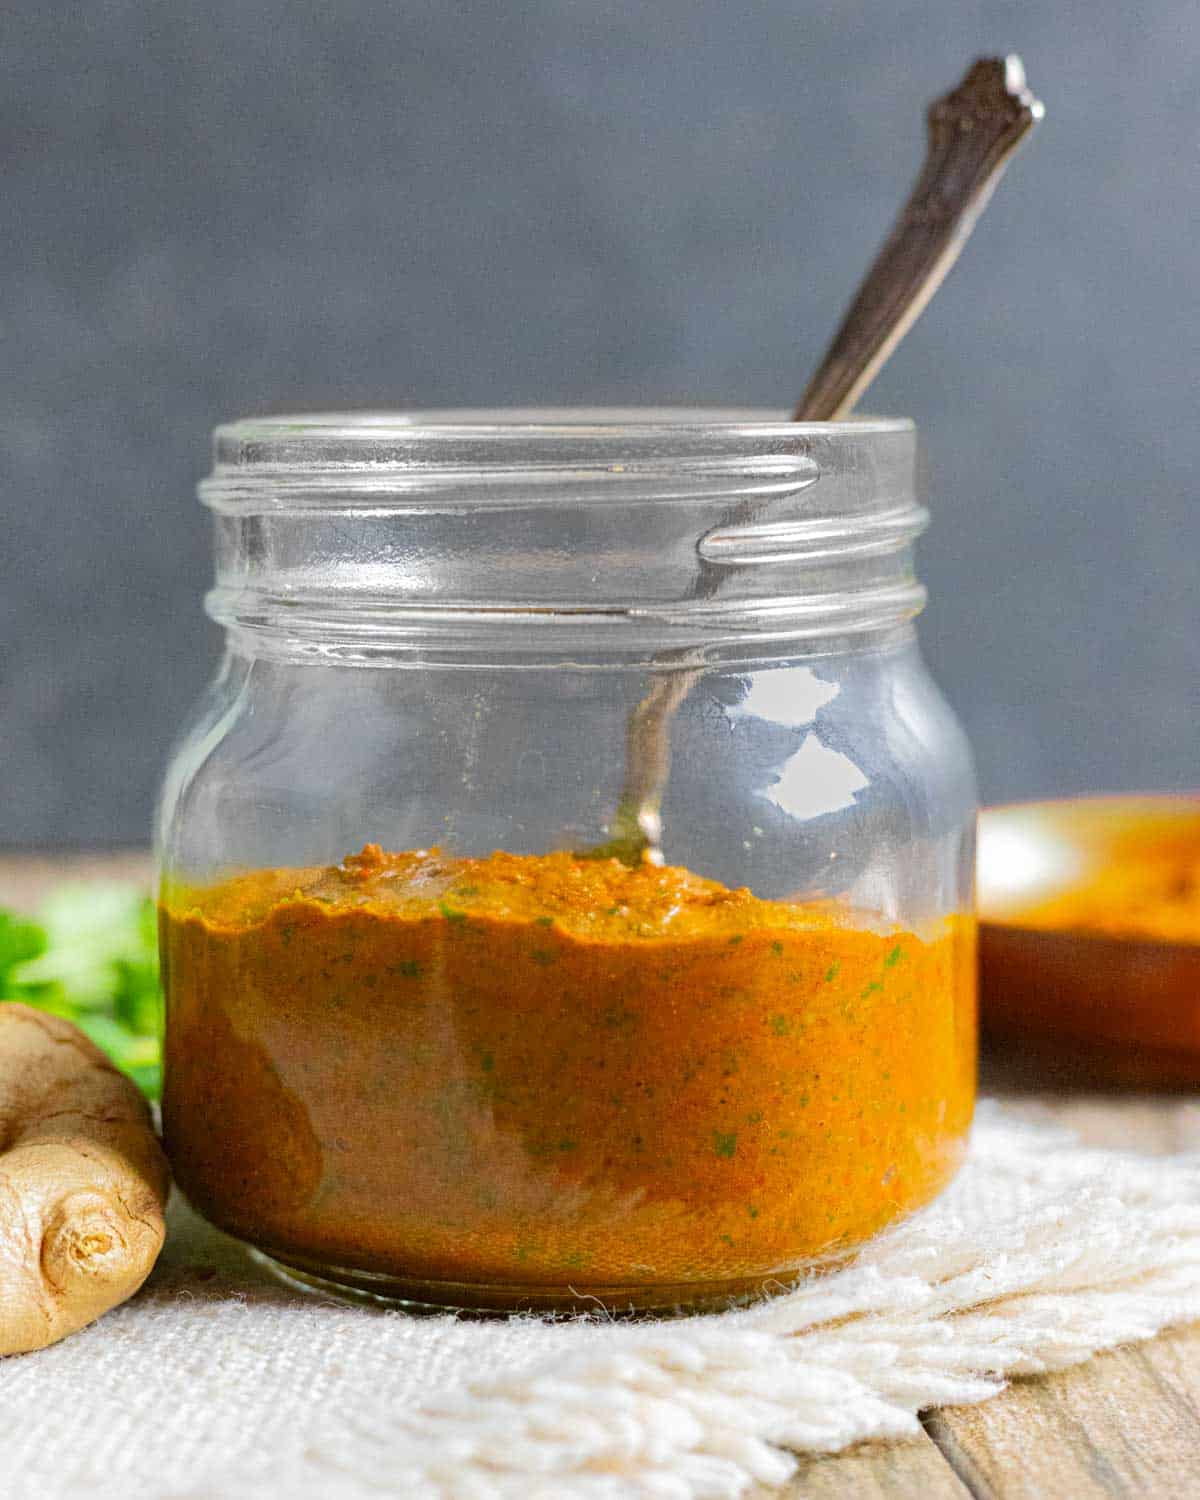 Small glass jar of tikka masala paste with a spoon in it and ginger root next to the jar.